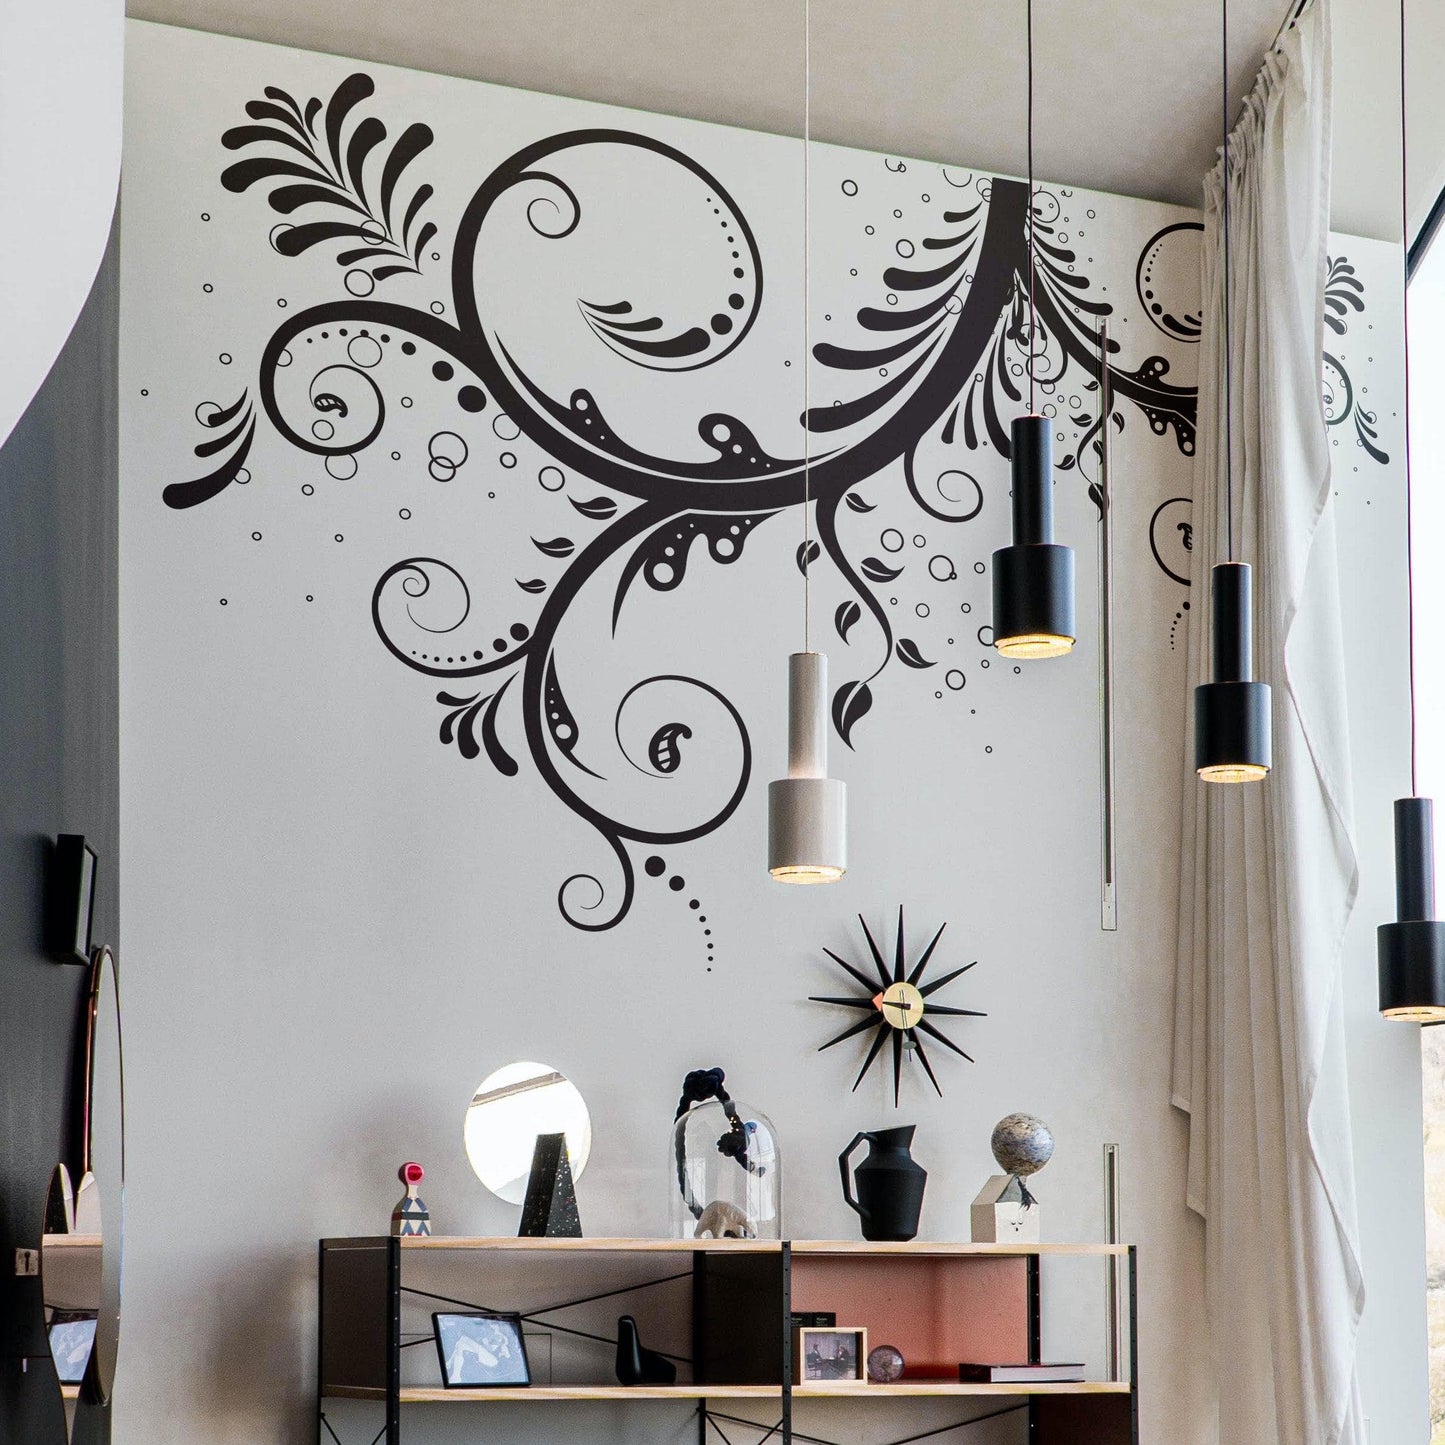 A black floral swirl decal on a white wall above a shelf.